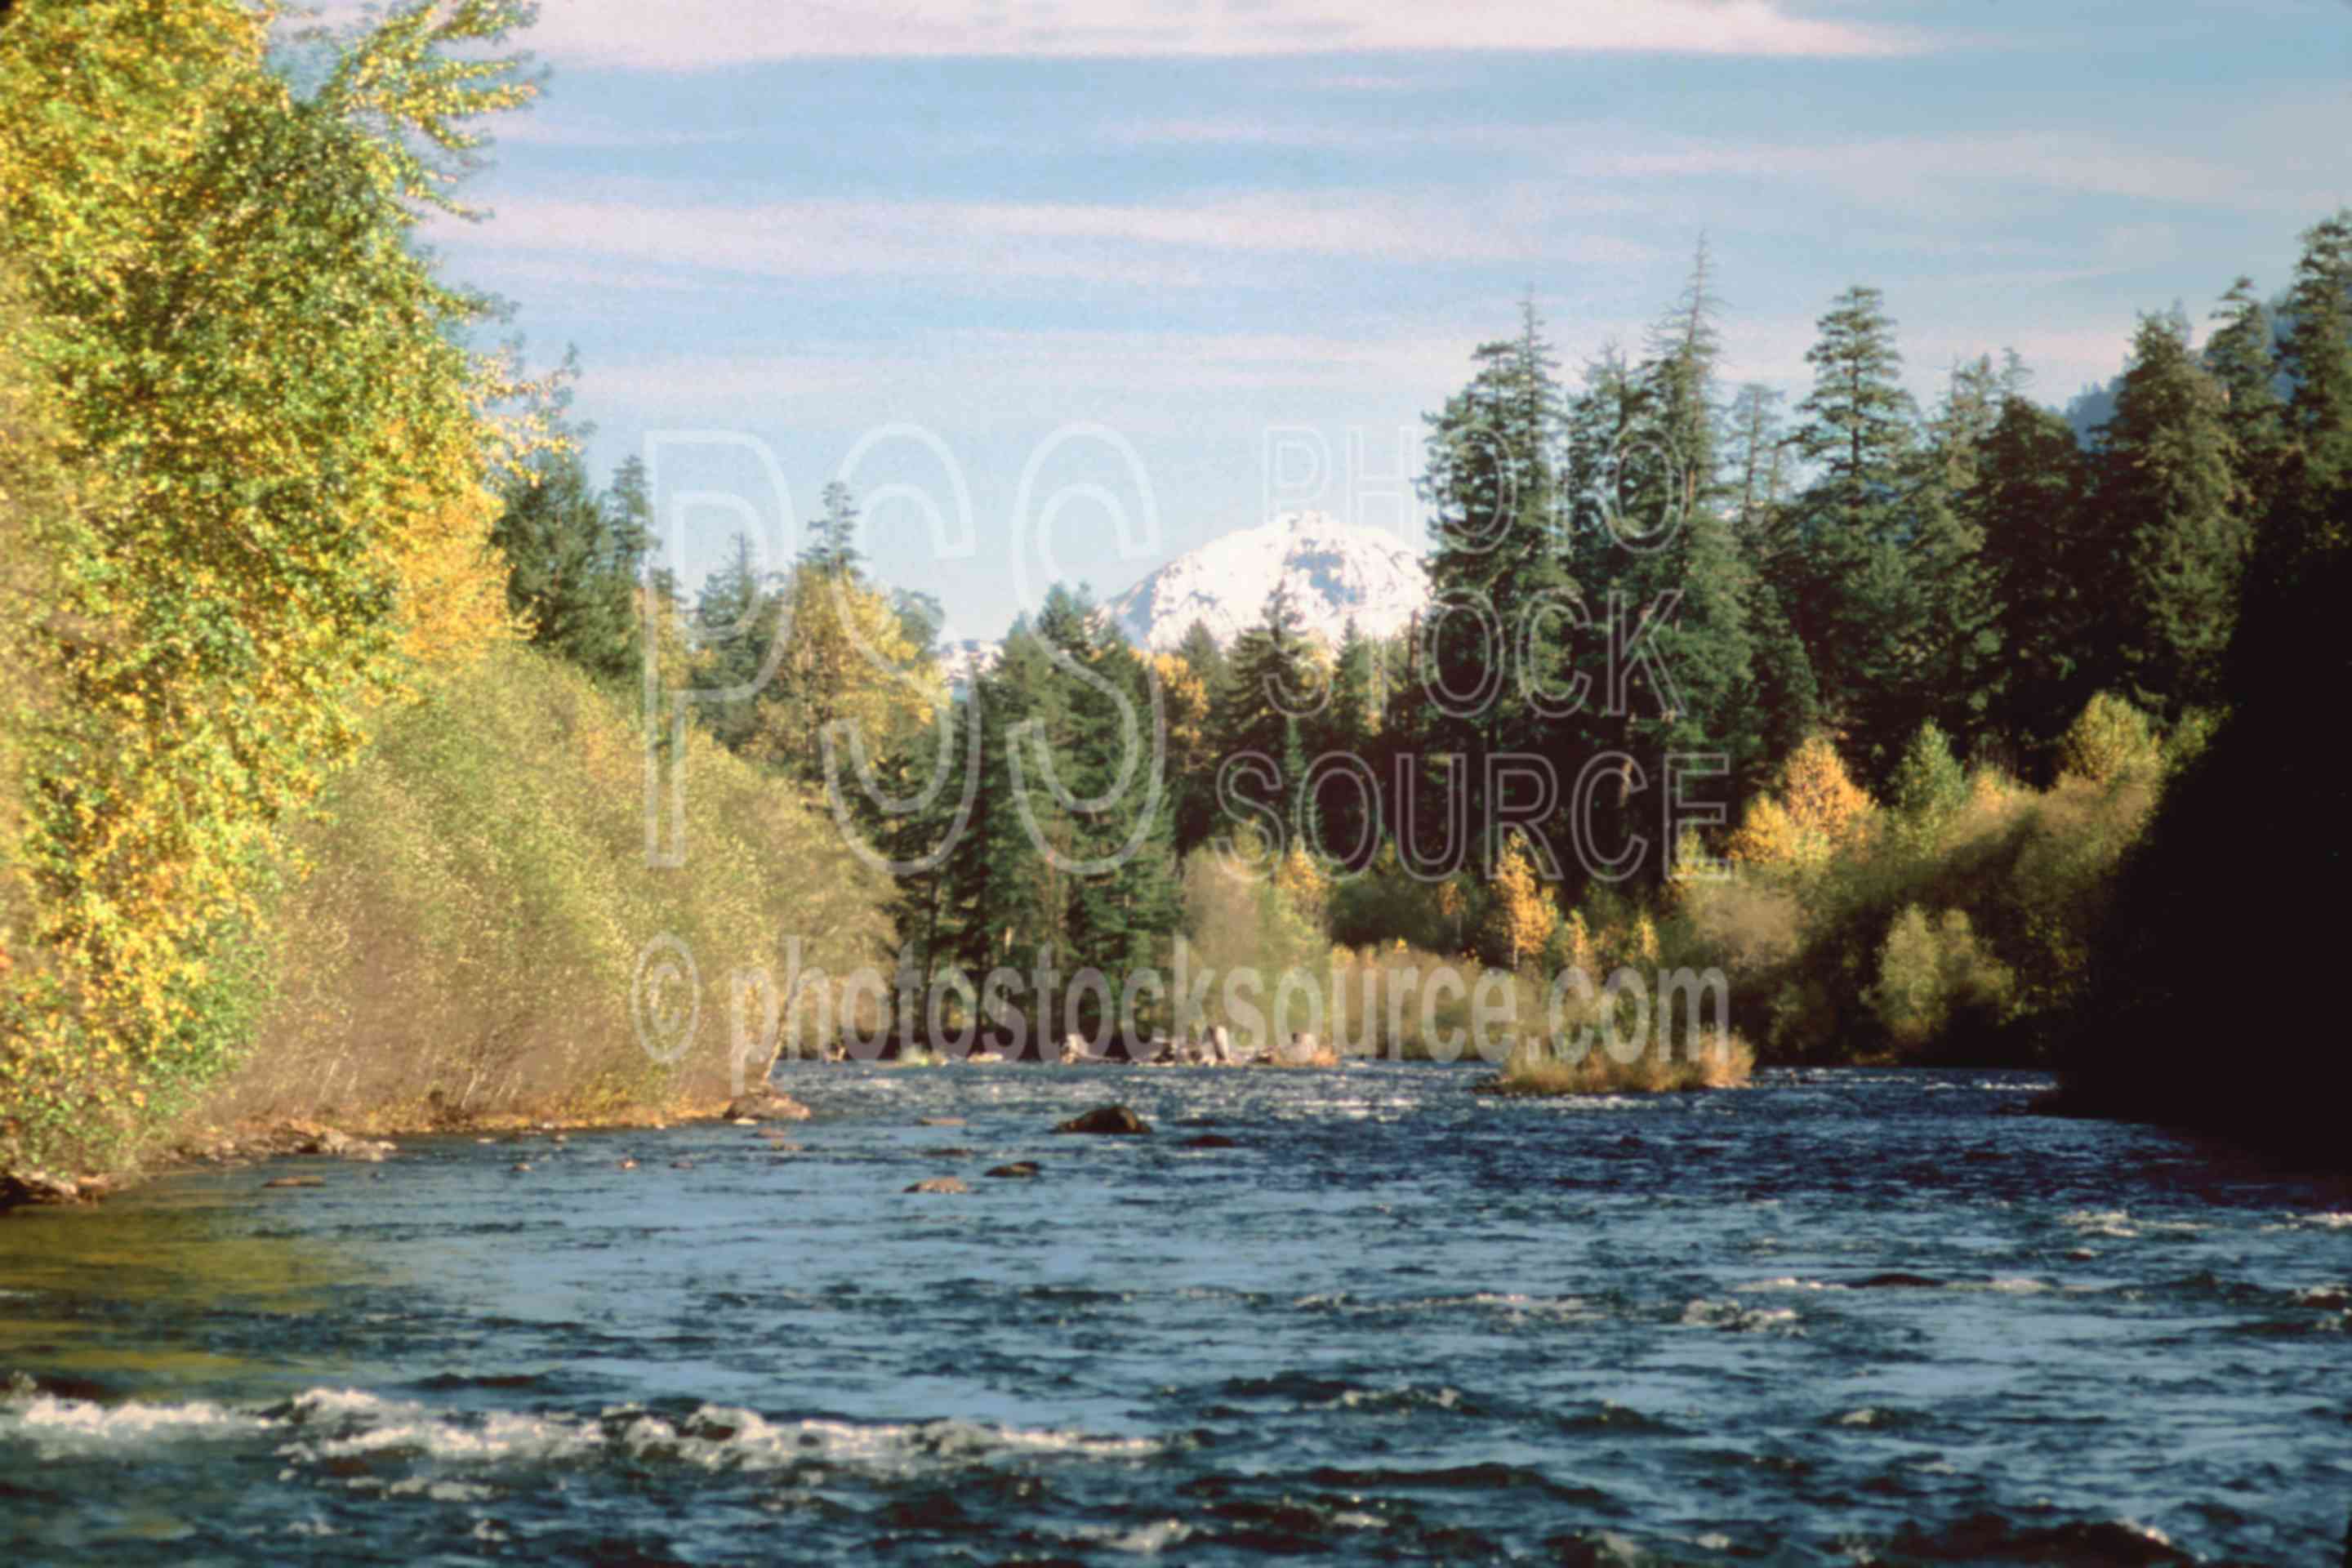 North Sister, McKenzie River,mckenzie river,north sister,river,usas,lakes rivers,mountains